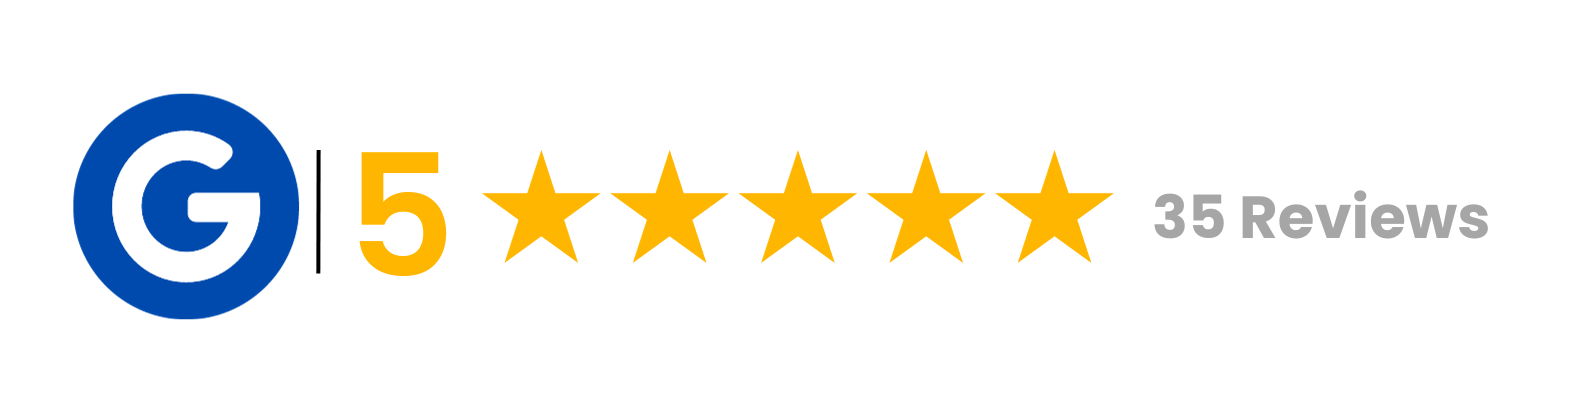 Rated 5 stars on Google Business profile